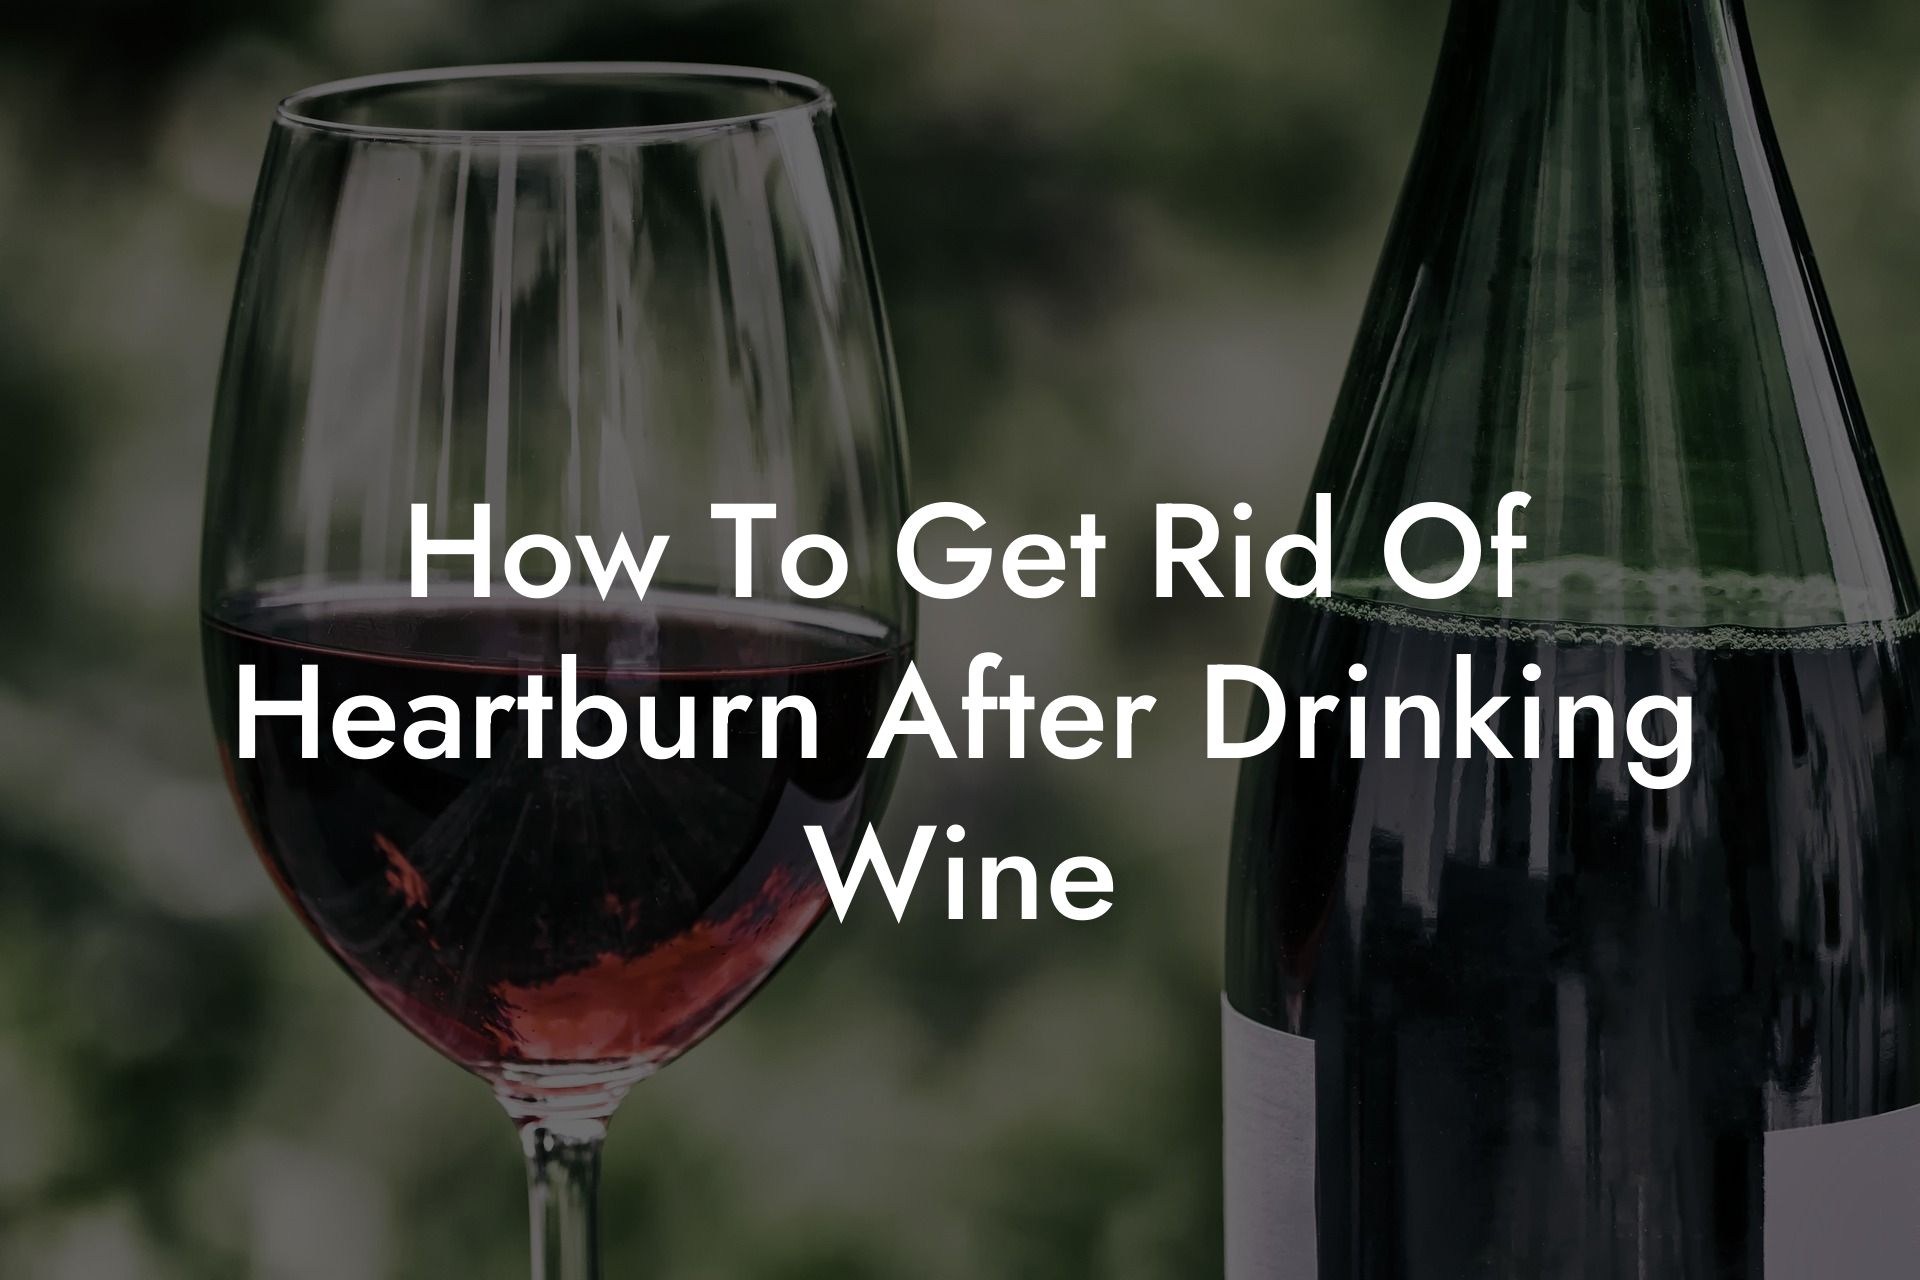 How To Get Rid Of Heartburn After Drinking Wine